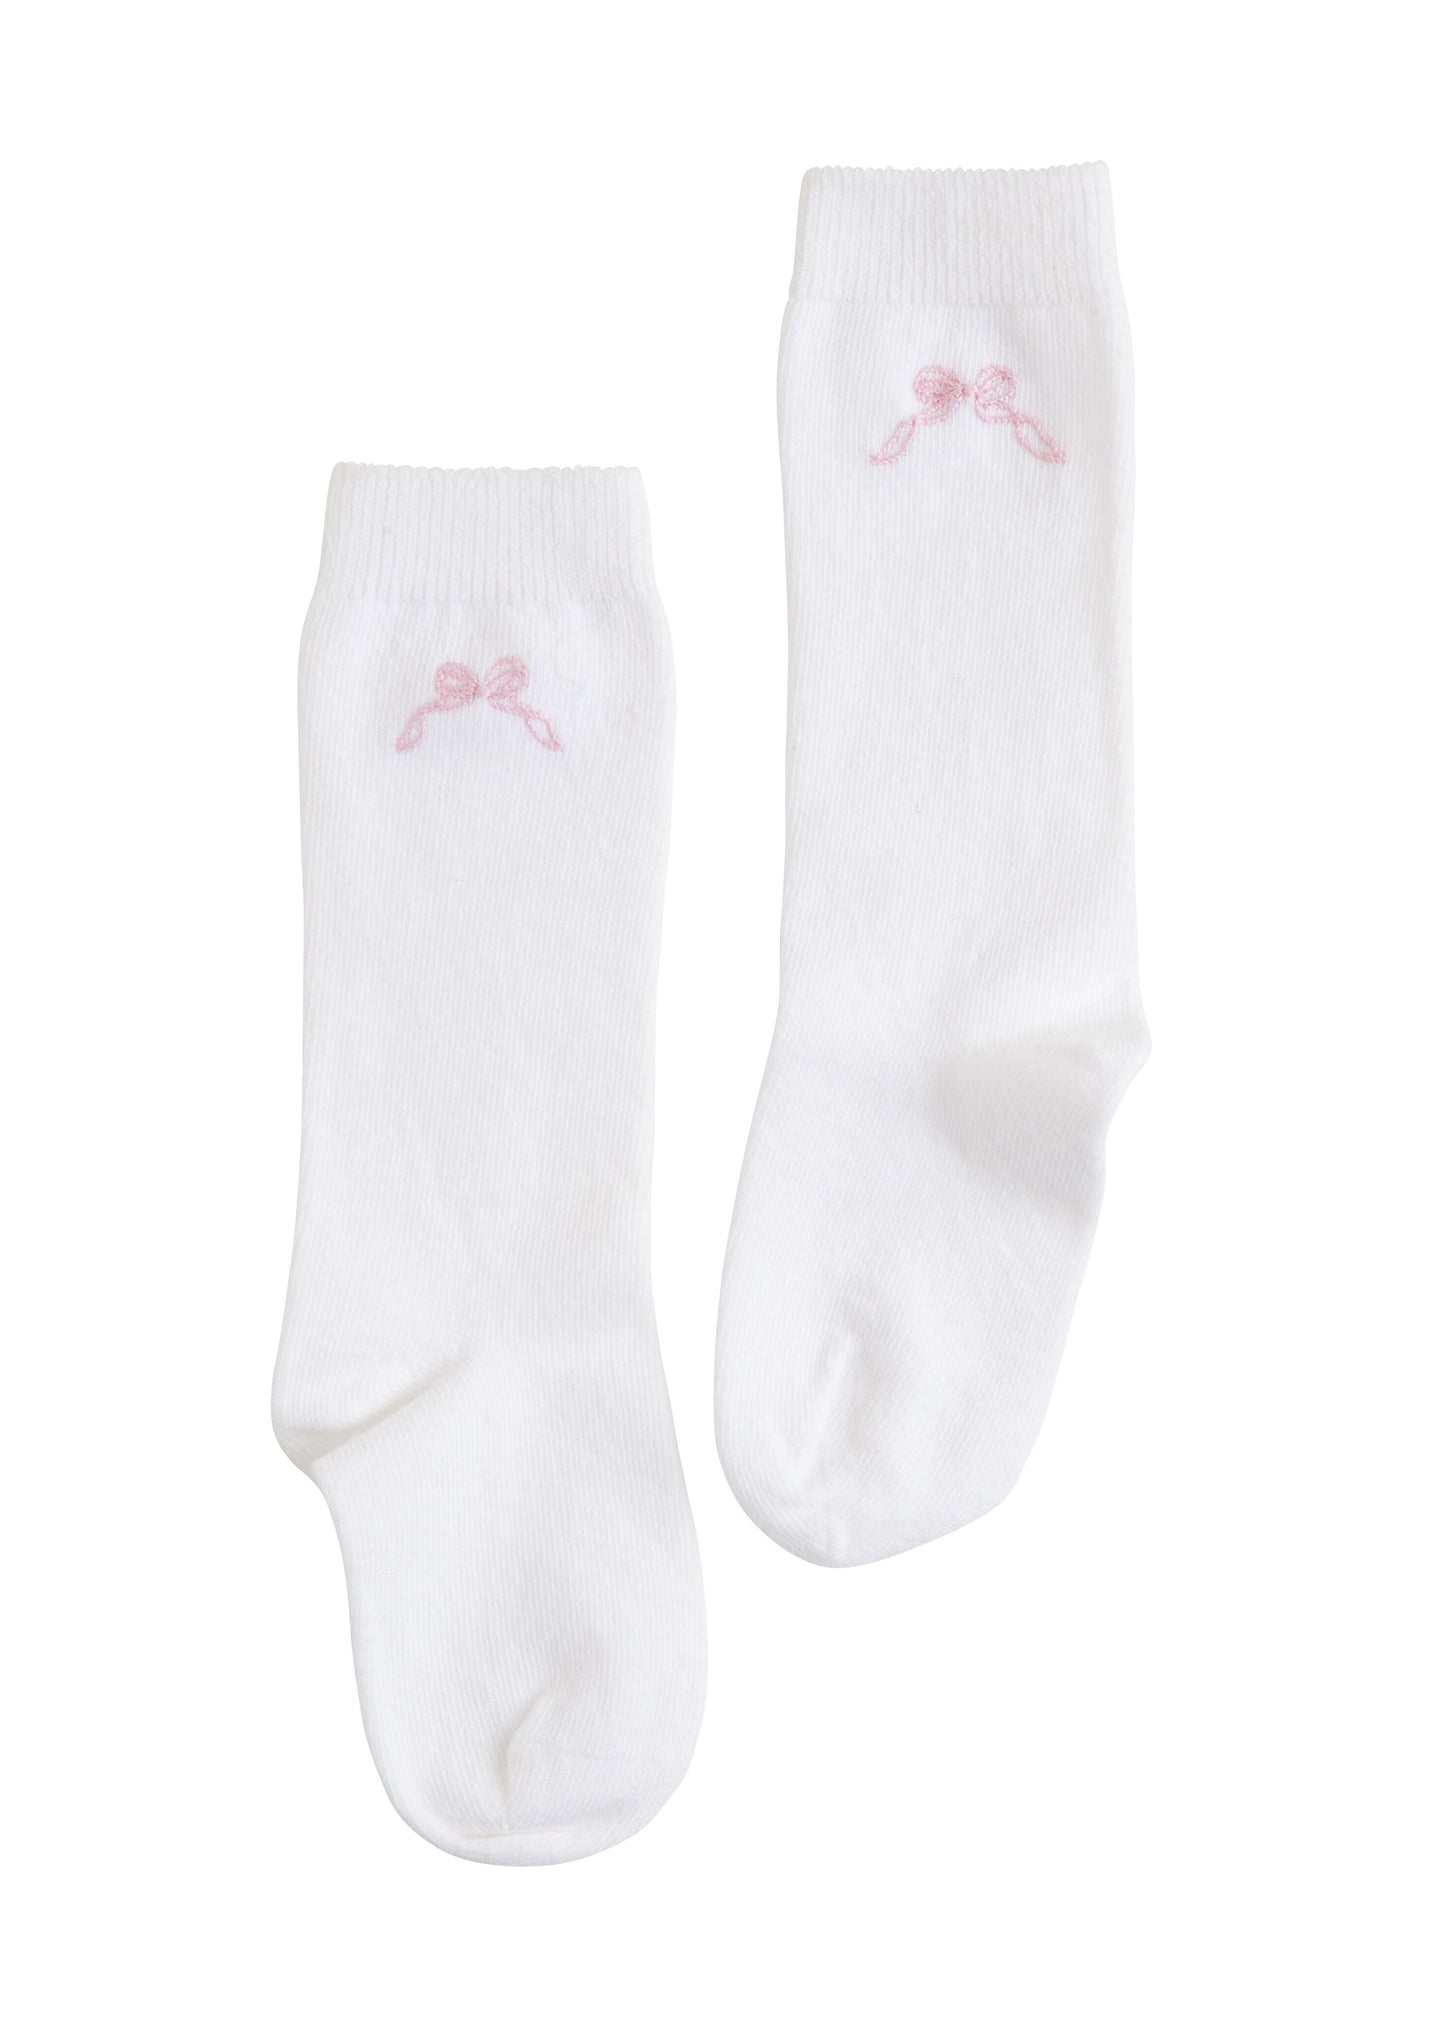 Little English Pink Bow Knee High Kids Socks Jojo Mommy Dallas Children's Clothing Shop and Online boutique